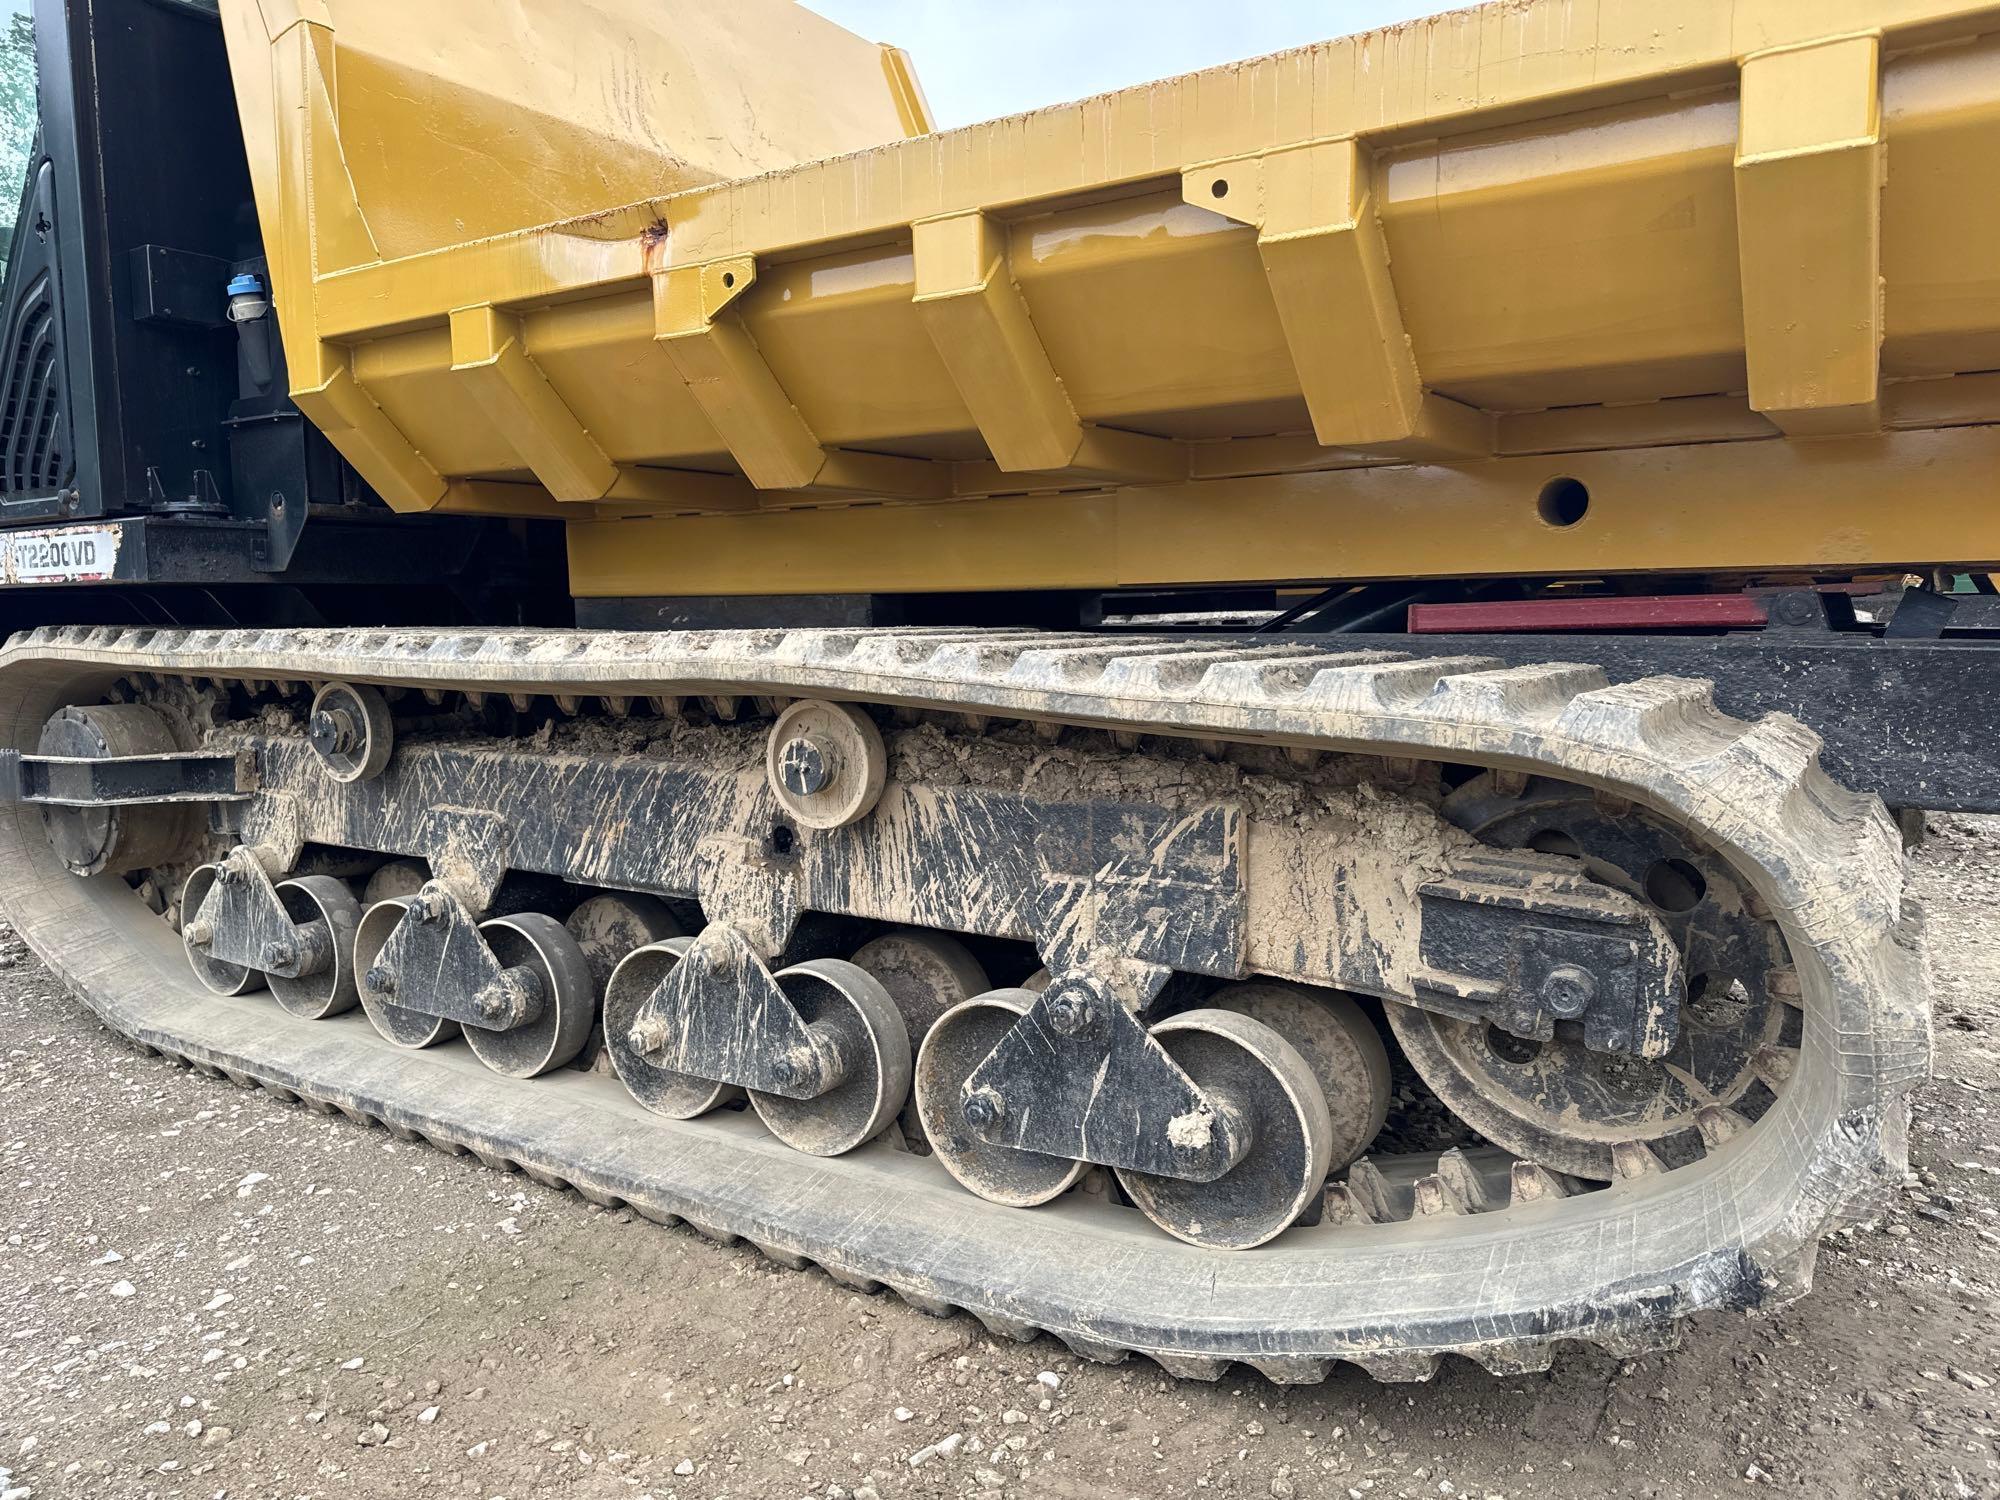 2019 MOROOKA MST2200VD CRAWLER CARRIER SN:A2202225 powered by Cat C7.1 diesel engine, equipped with